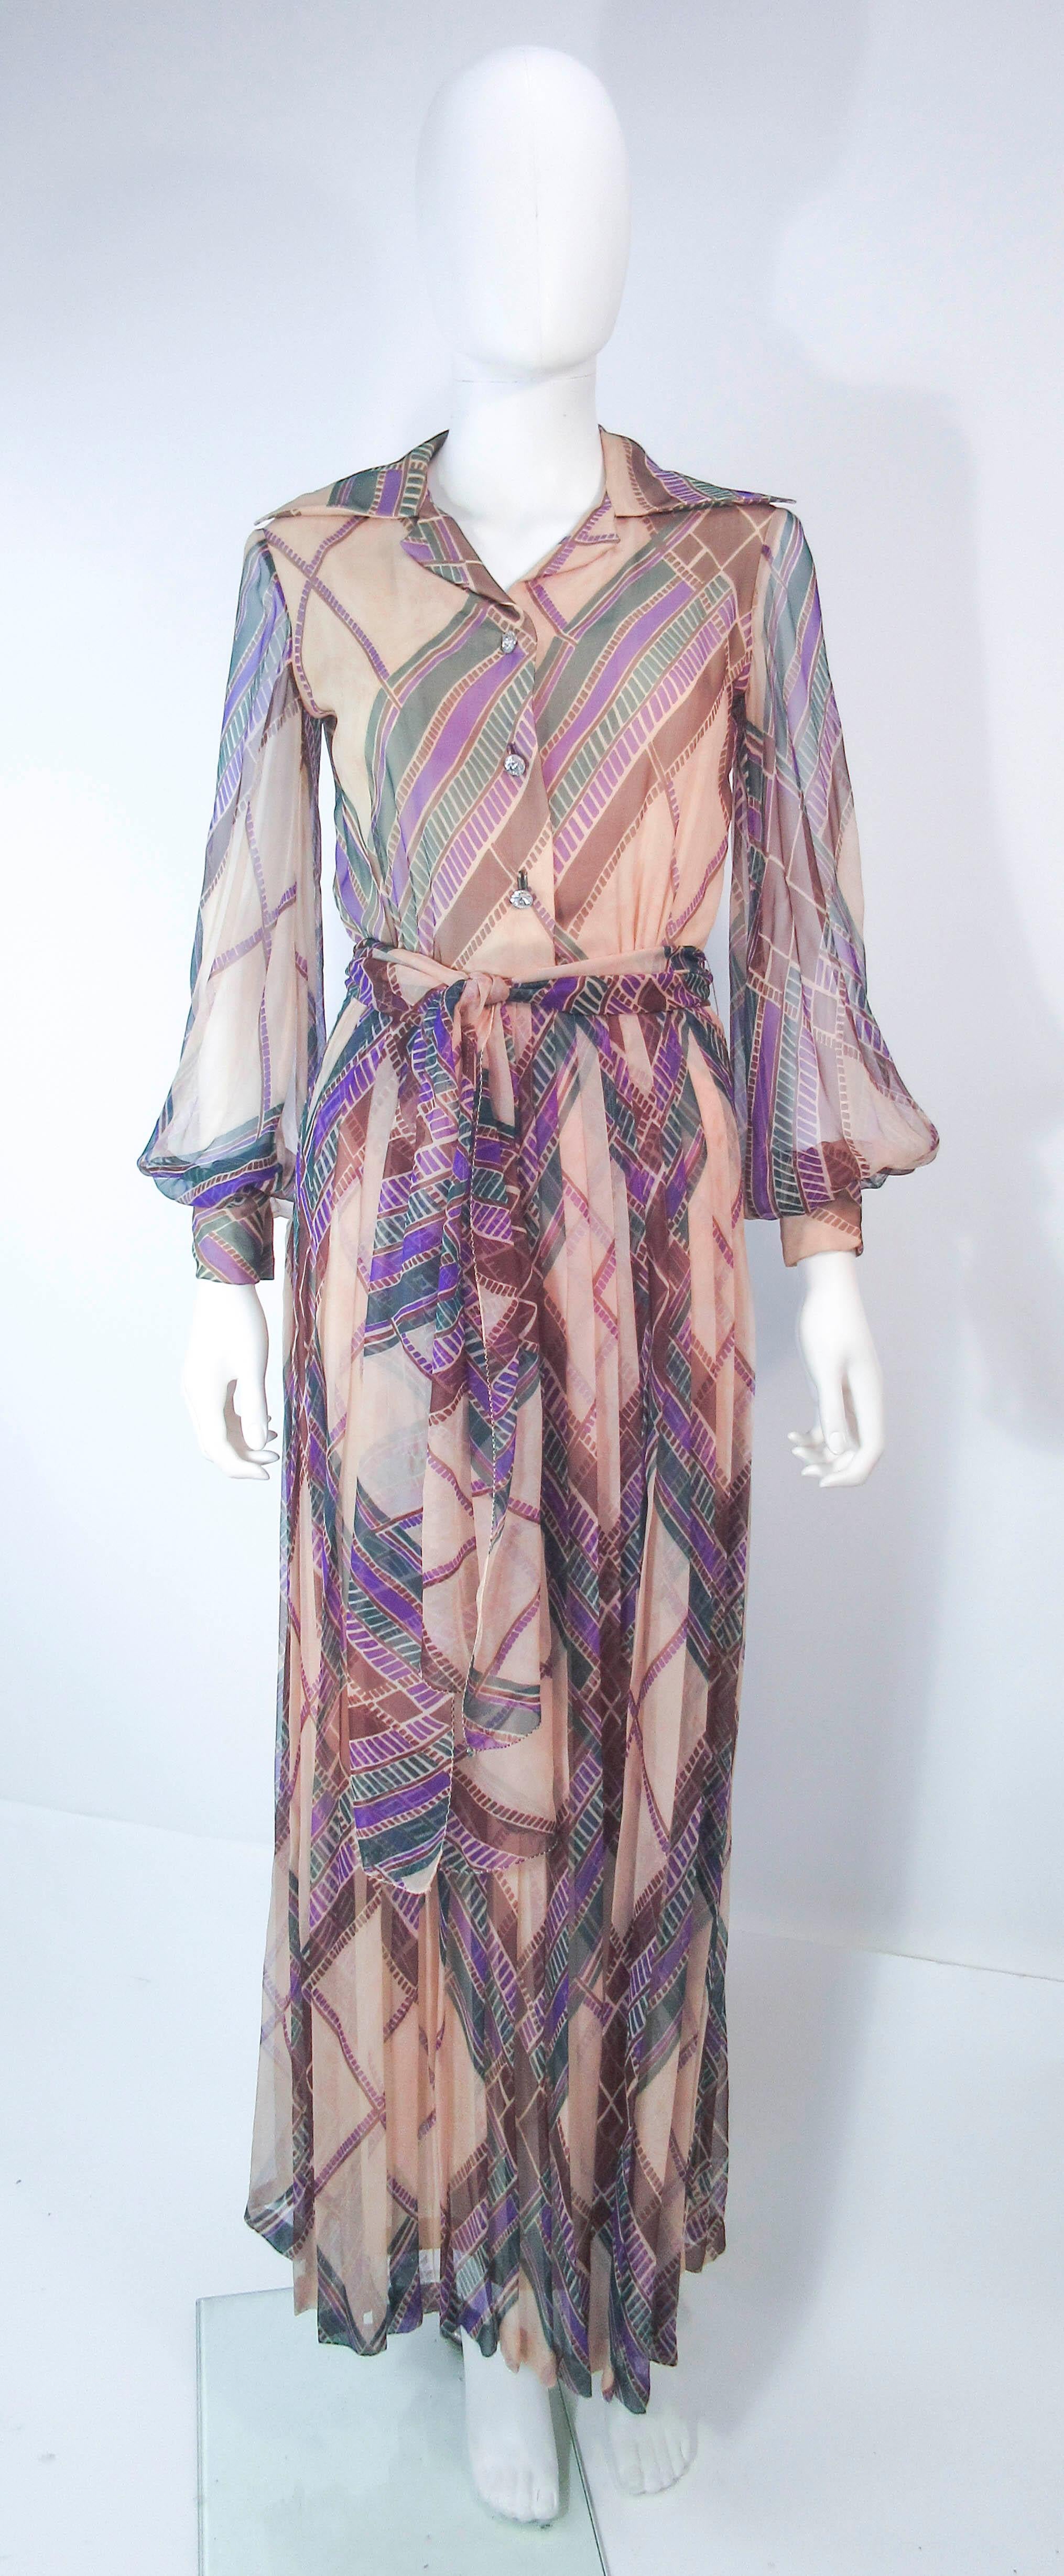 This Valentino design is composed of a beautiful abstract printed silk chiffon. Features a wonderful maxi style with center front rhinestone buttons and belt.  In excellent vintage condition, some wear (see photos). 

**Please cross-reference